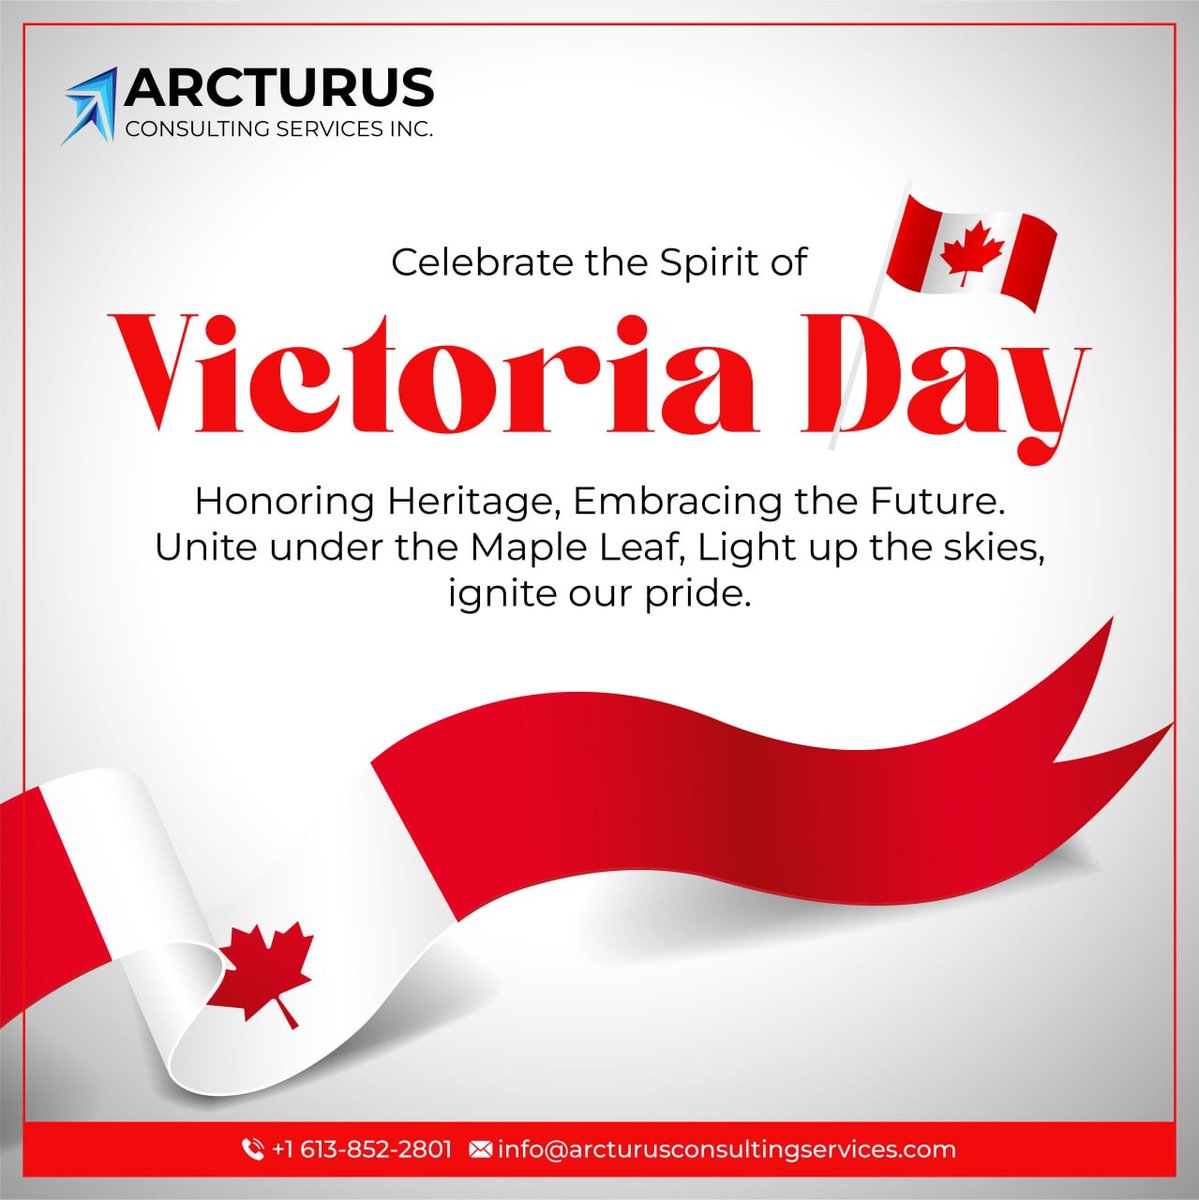 Wishing you a Happy Victoria Day! Today, we honor the legacy of Queen Victoria and celebrate the start of summer. May your long weekend be filled with joy, relaxation and cherished moments with family and friends. #victoriaday #friendsandfamily #oracleconsulting #arcturus